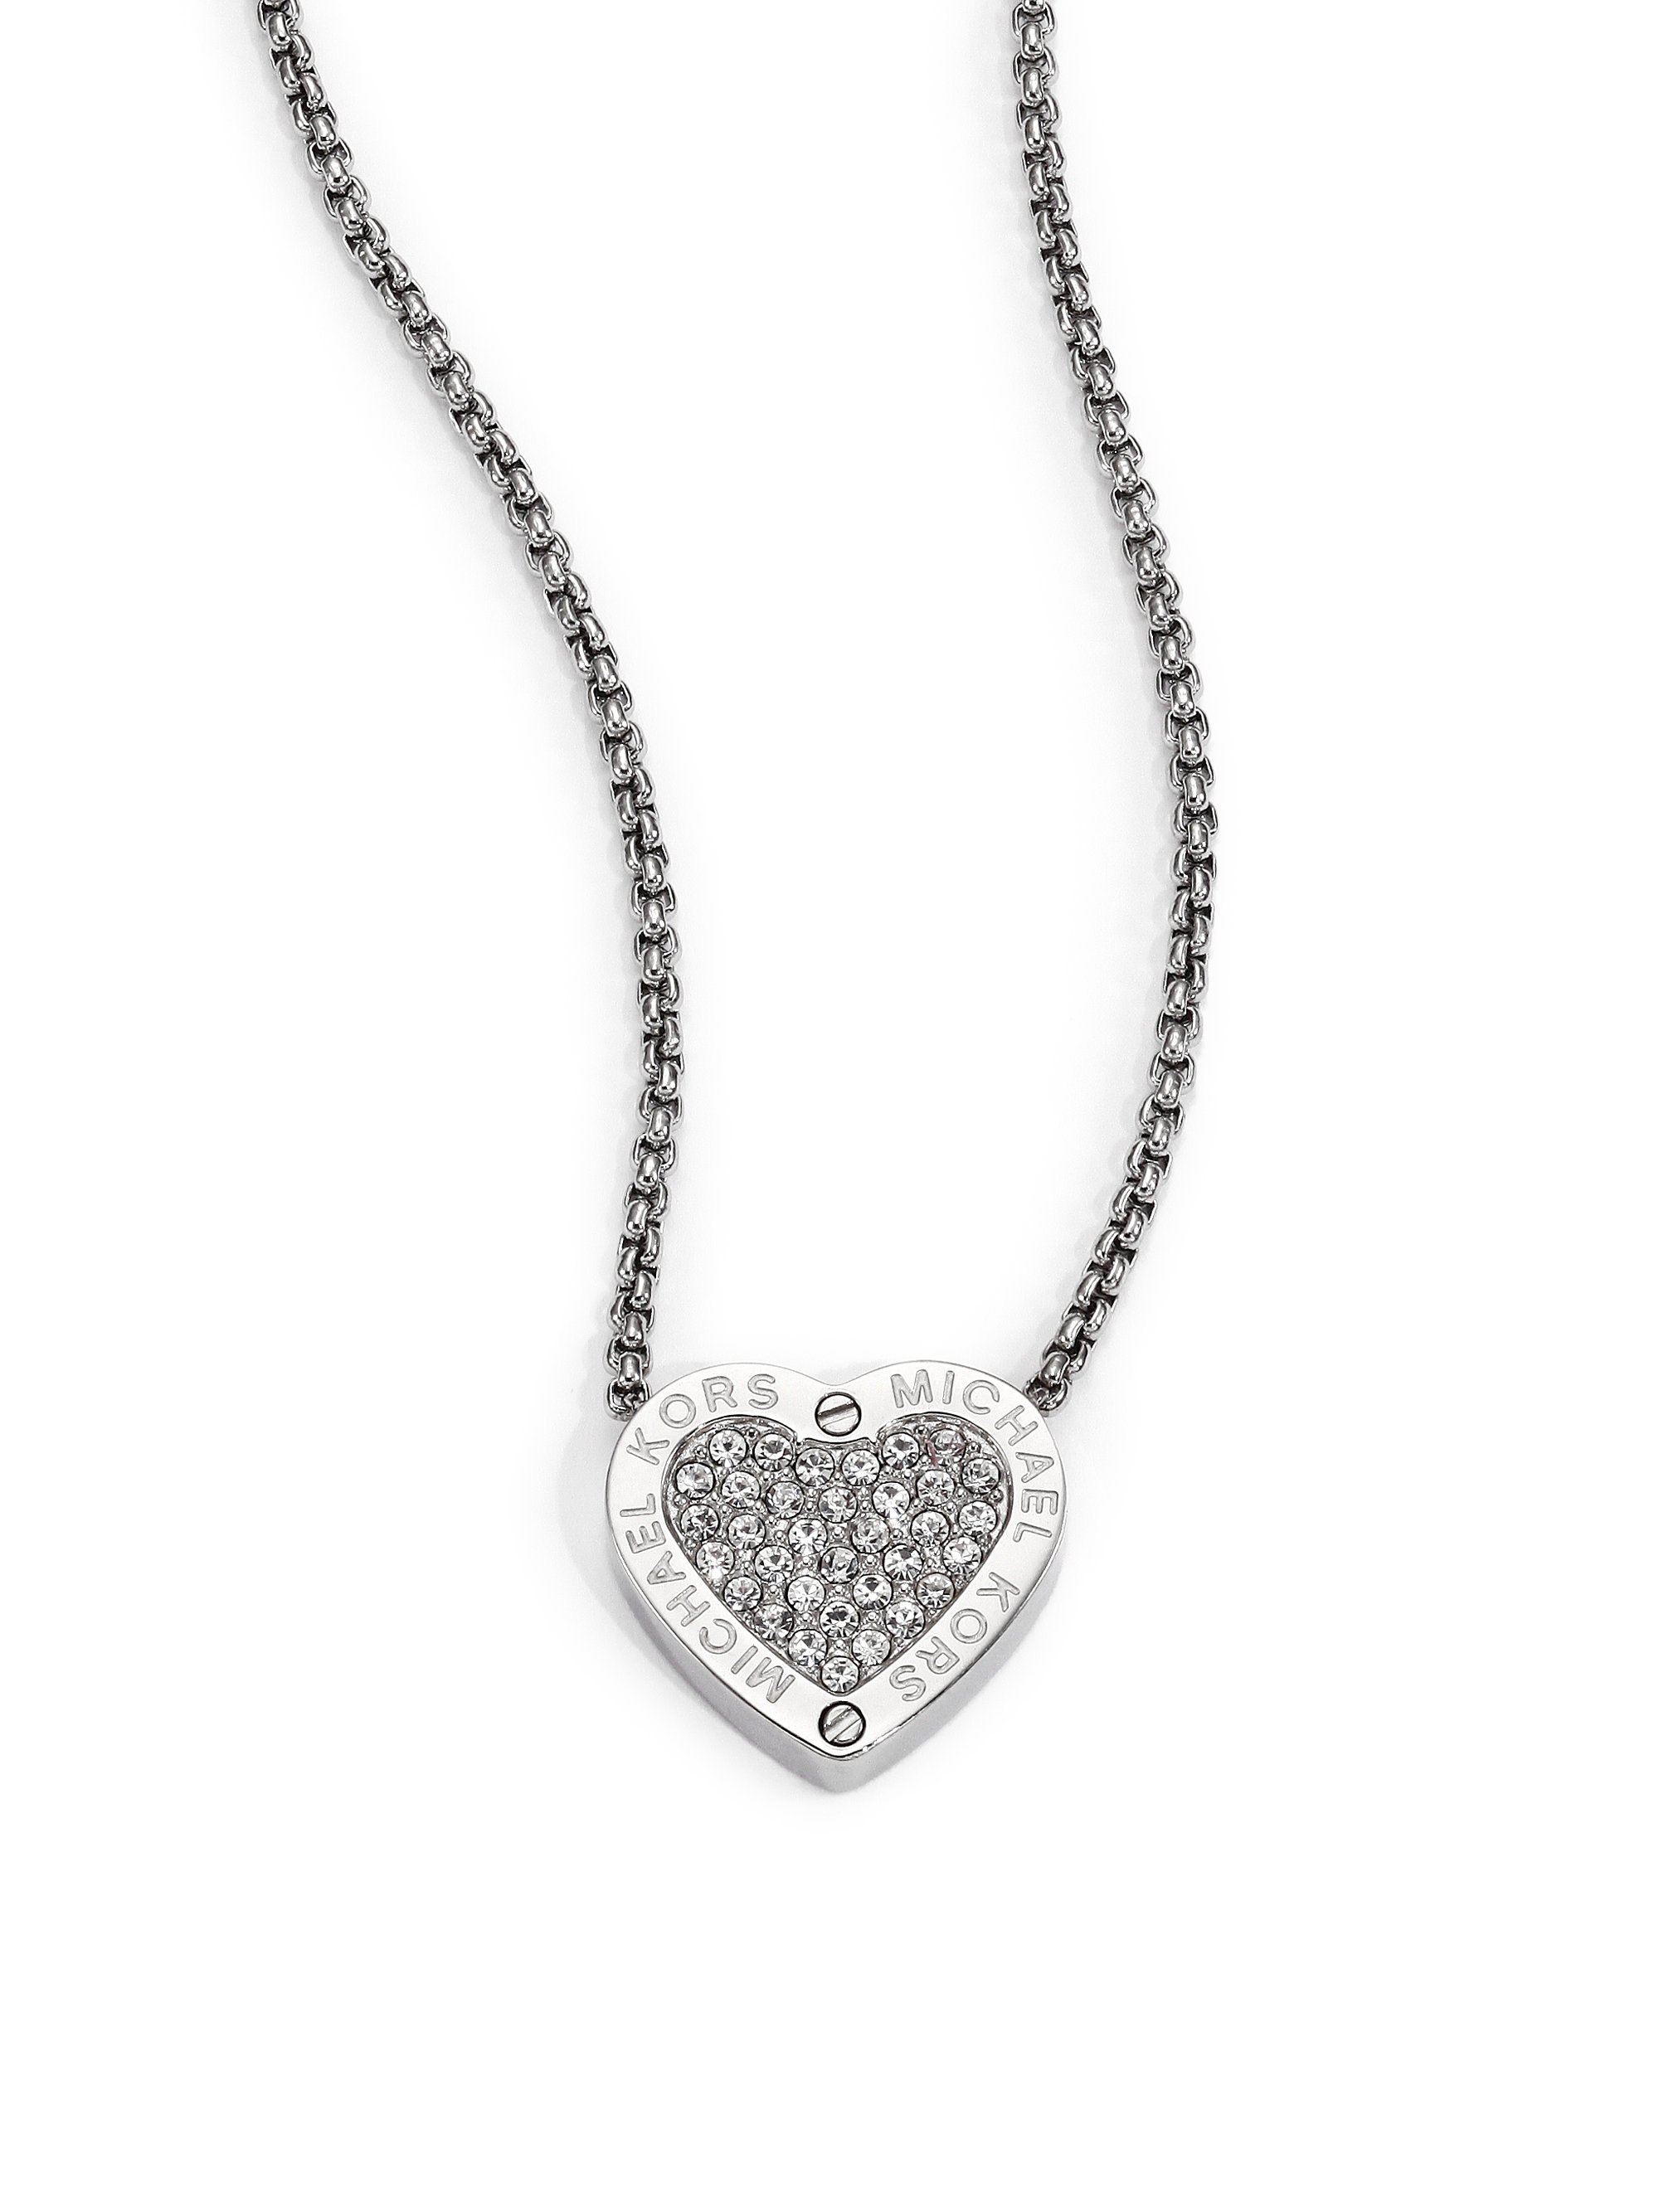 Michael Kors Heritage Hearts Pave Necklace/silvertone in Metallic - Lyst